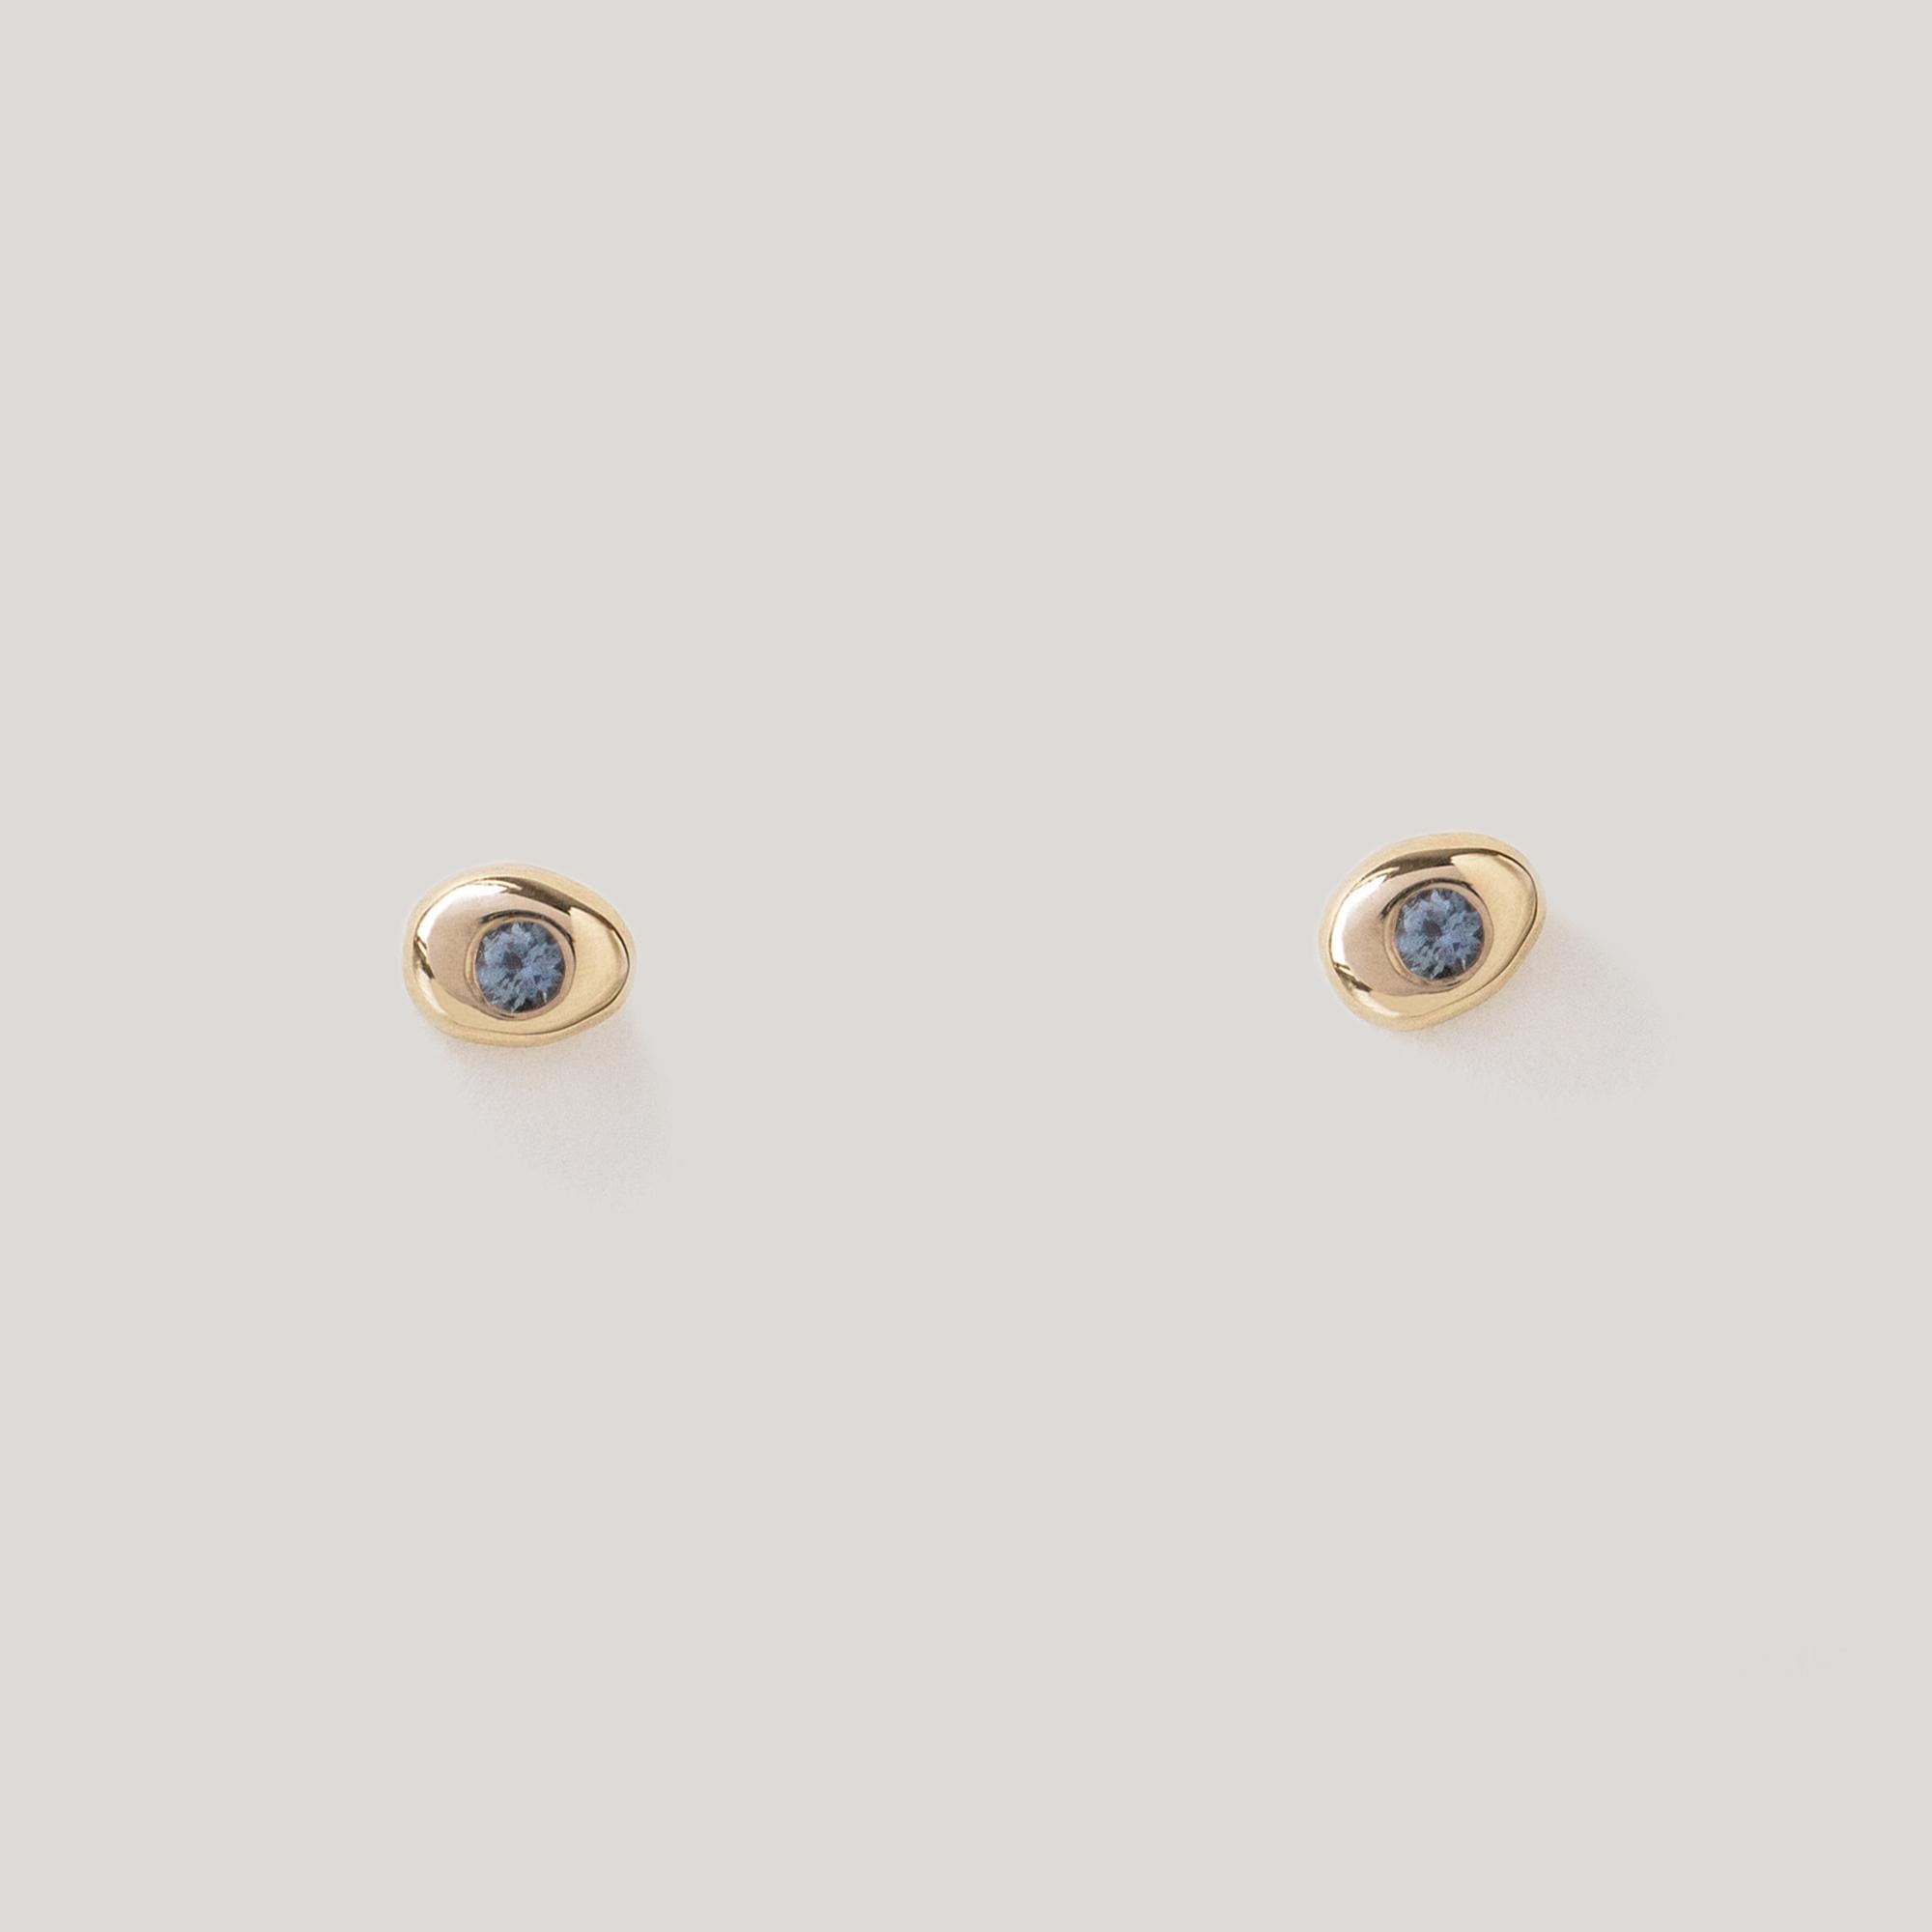 Tender little pebble studs, pierced with a Teal Sapphire center.

MATERIAL
◘  4mm wide by 5.5mm tall
◘  2mm brilliant-cut Teal Sapphire
◘  Sapphires are fair trade and sourced responsibly
◘  Post and back closure
◘  Sold as a pair
◘ Available in 14k